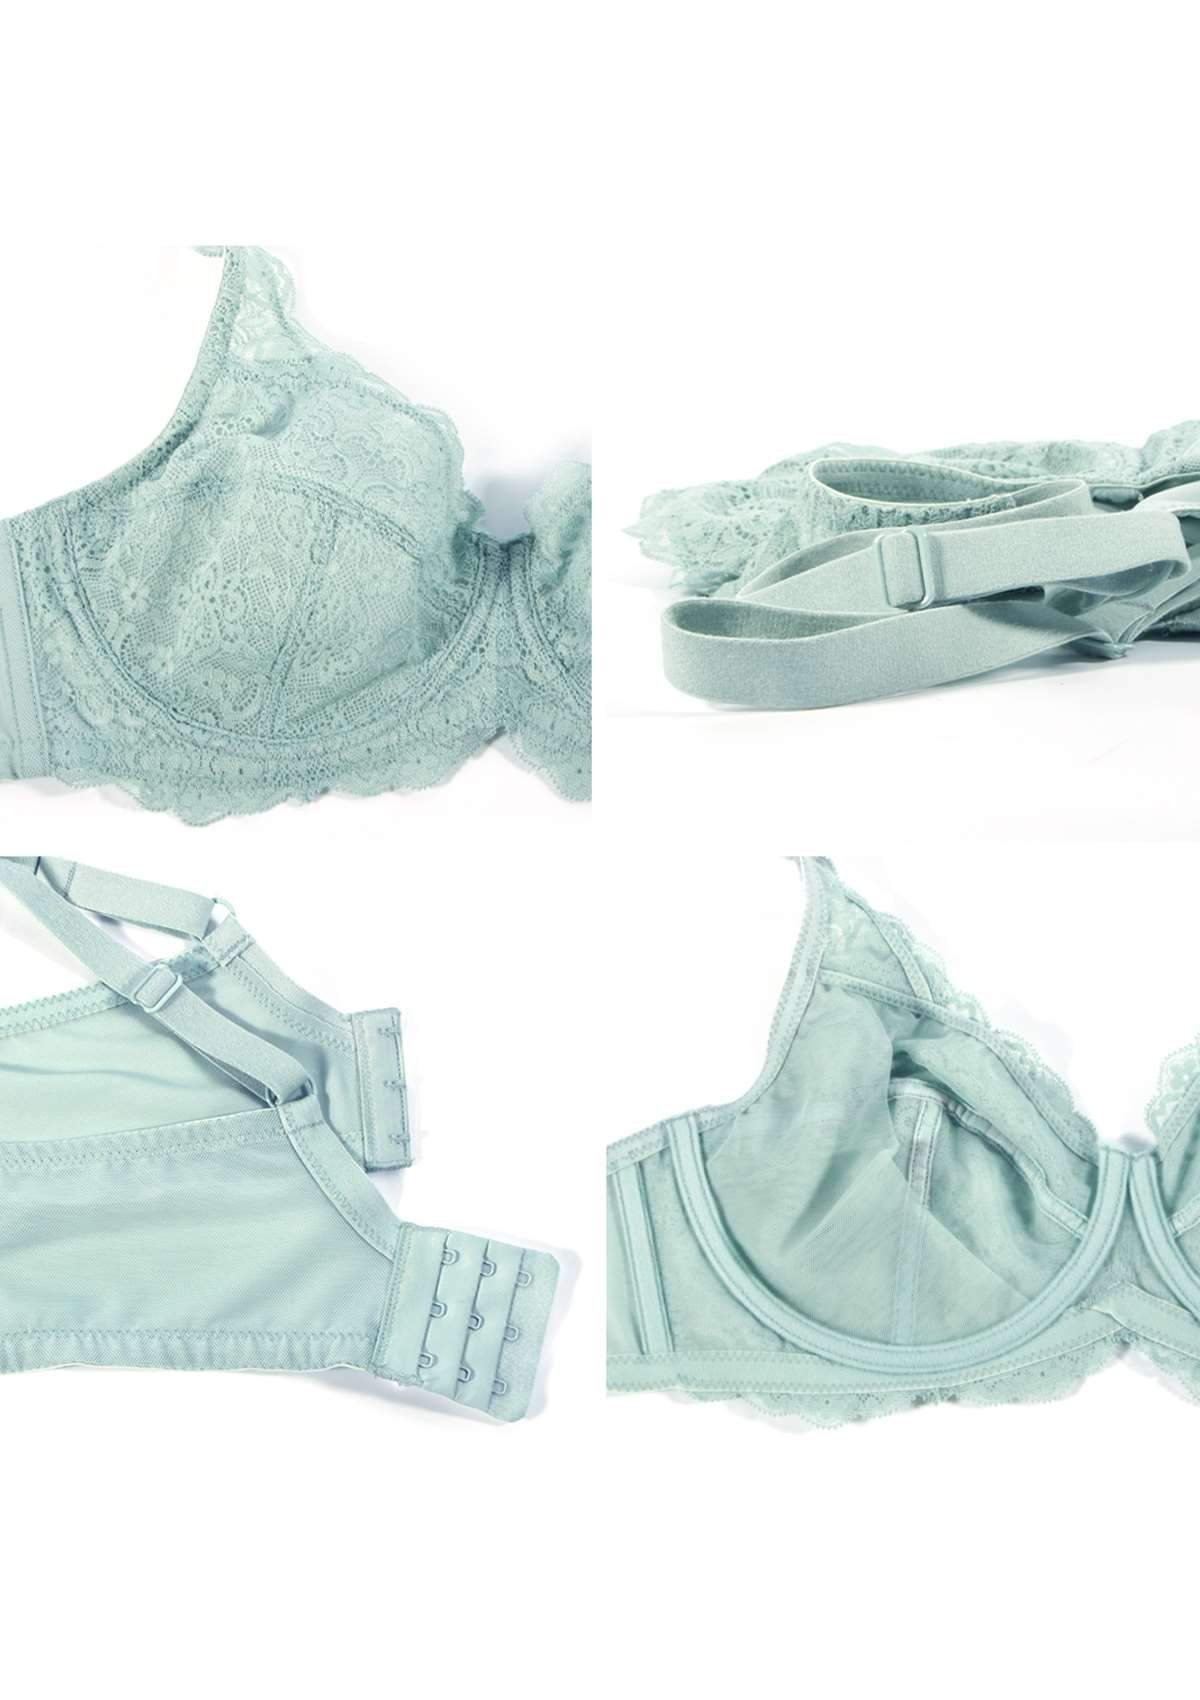 HSIA All-Over Floral Lace: Best Bra For Elderly With Sagging Breasts - Pewter Blue / 44 / DD/E